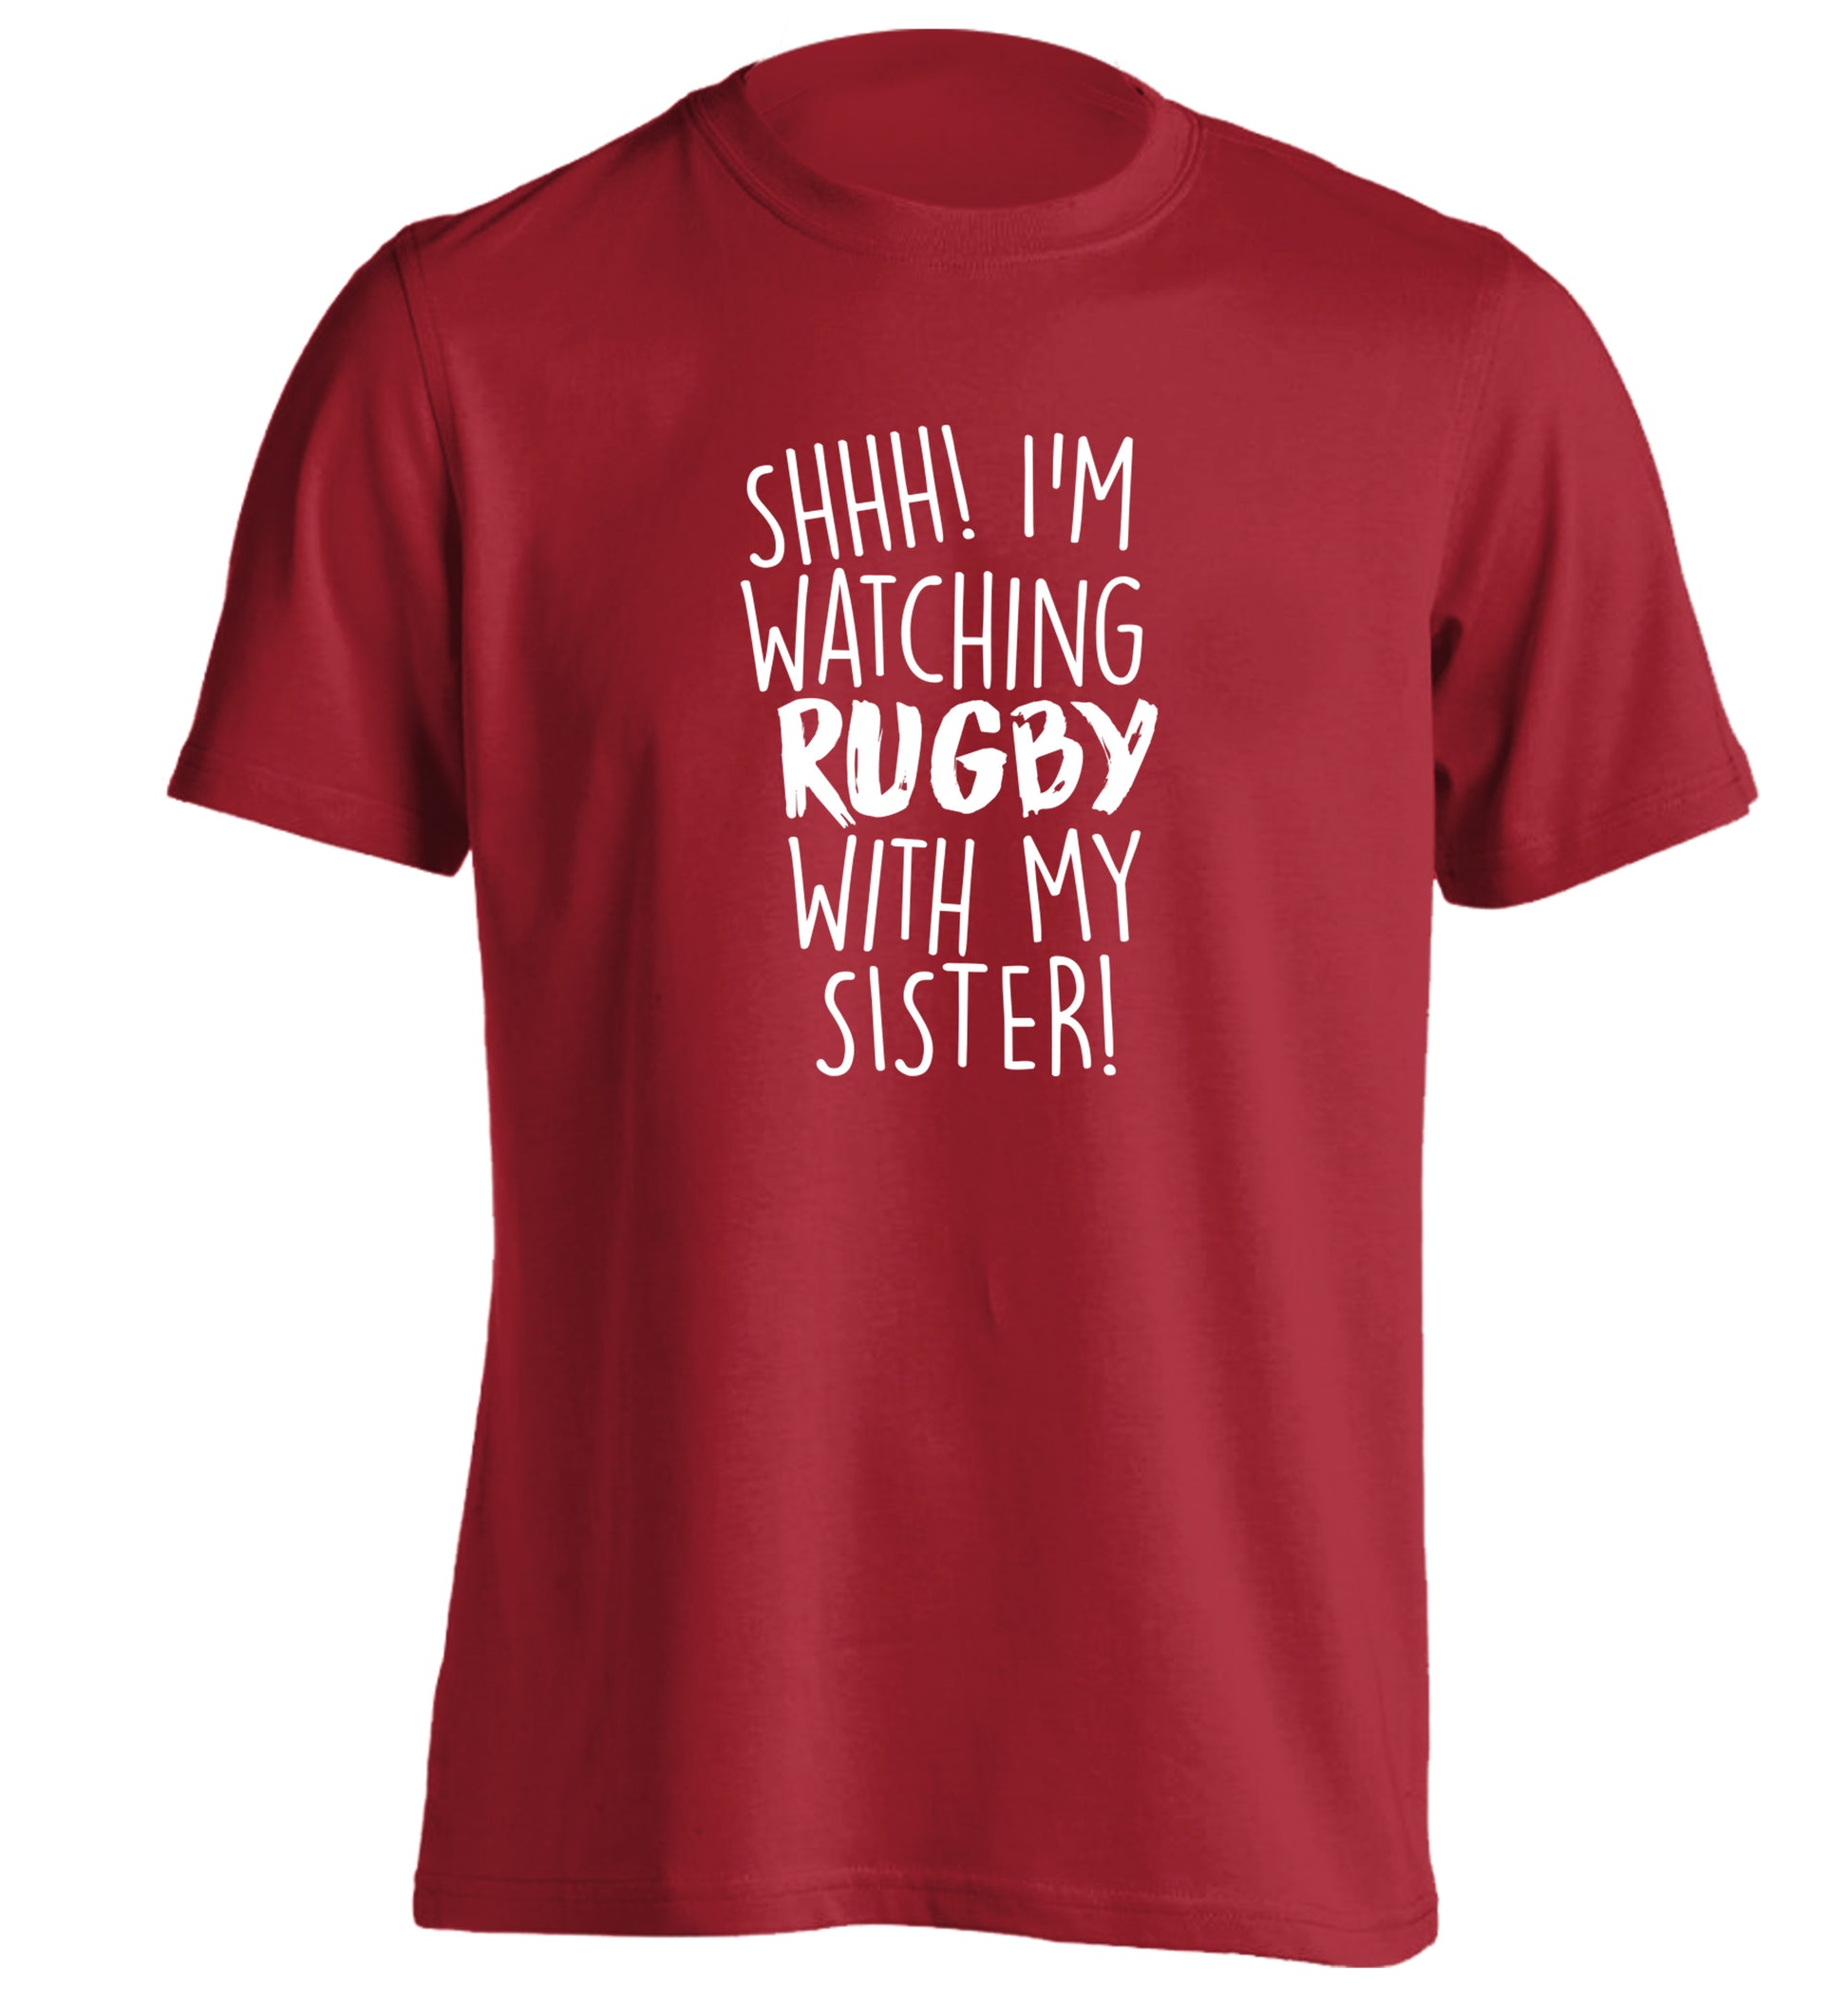 Shh... I'm watching rugby with my sister adults unisex red Tshirt 2XL